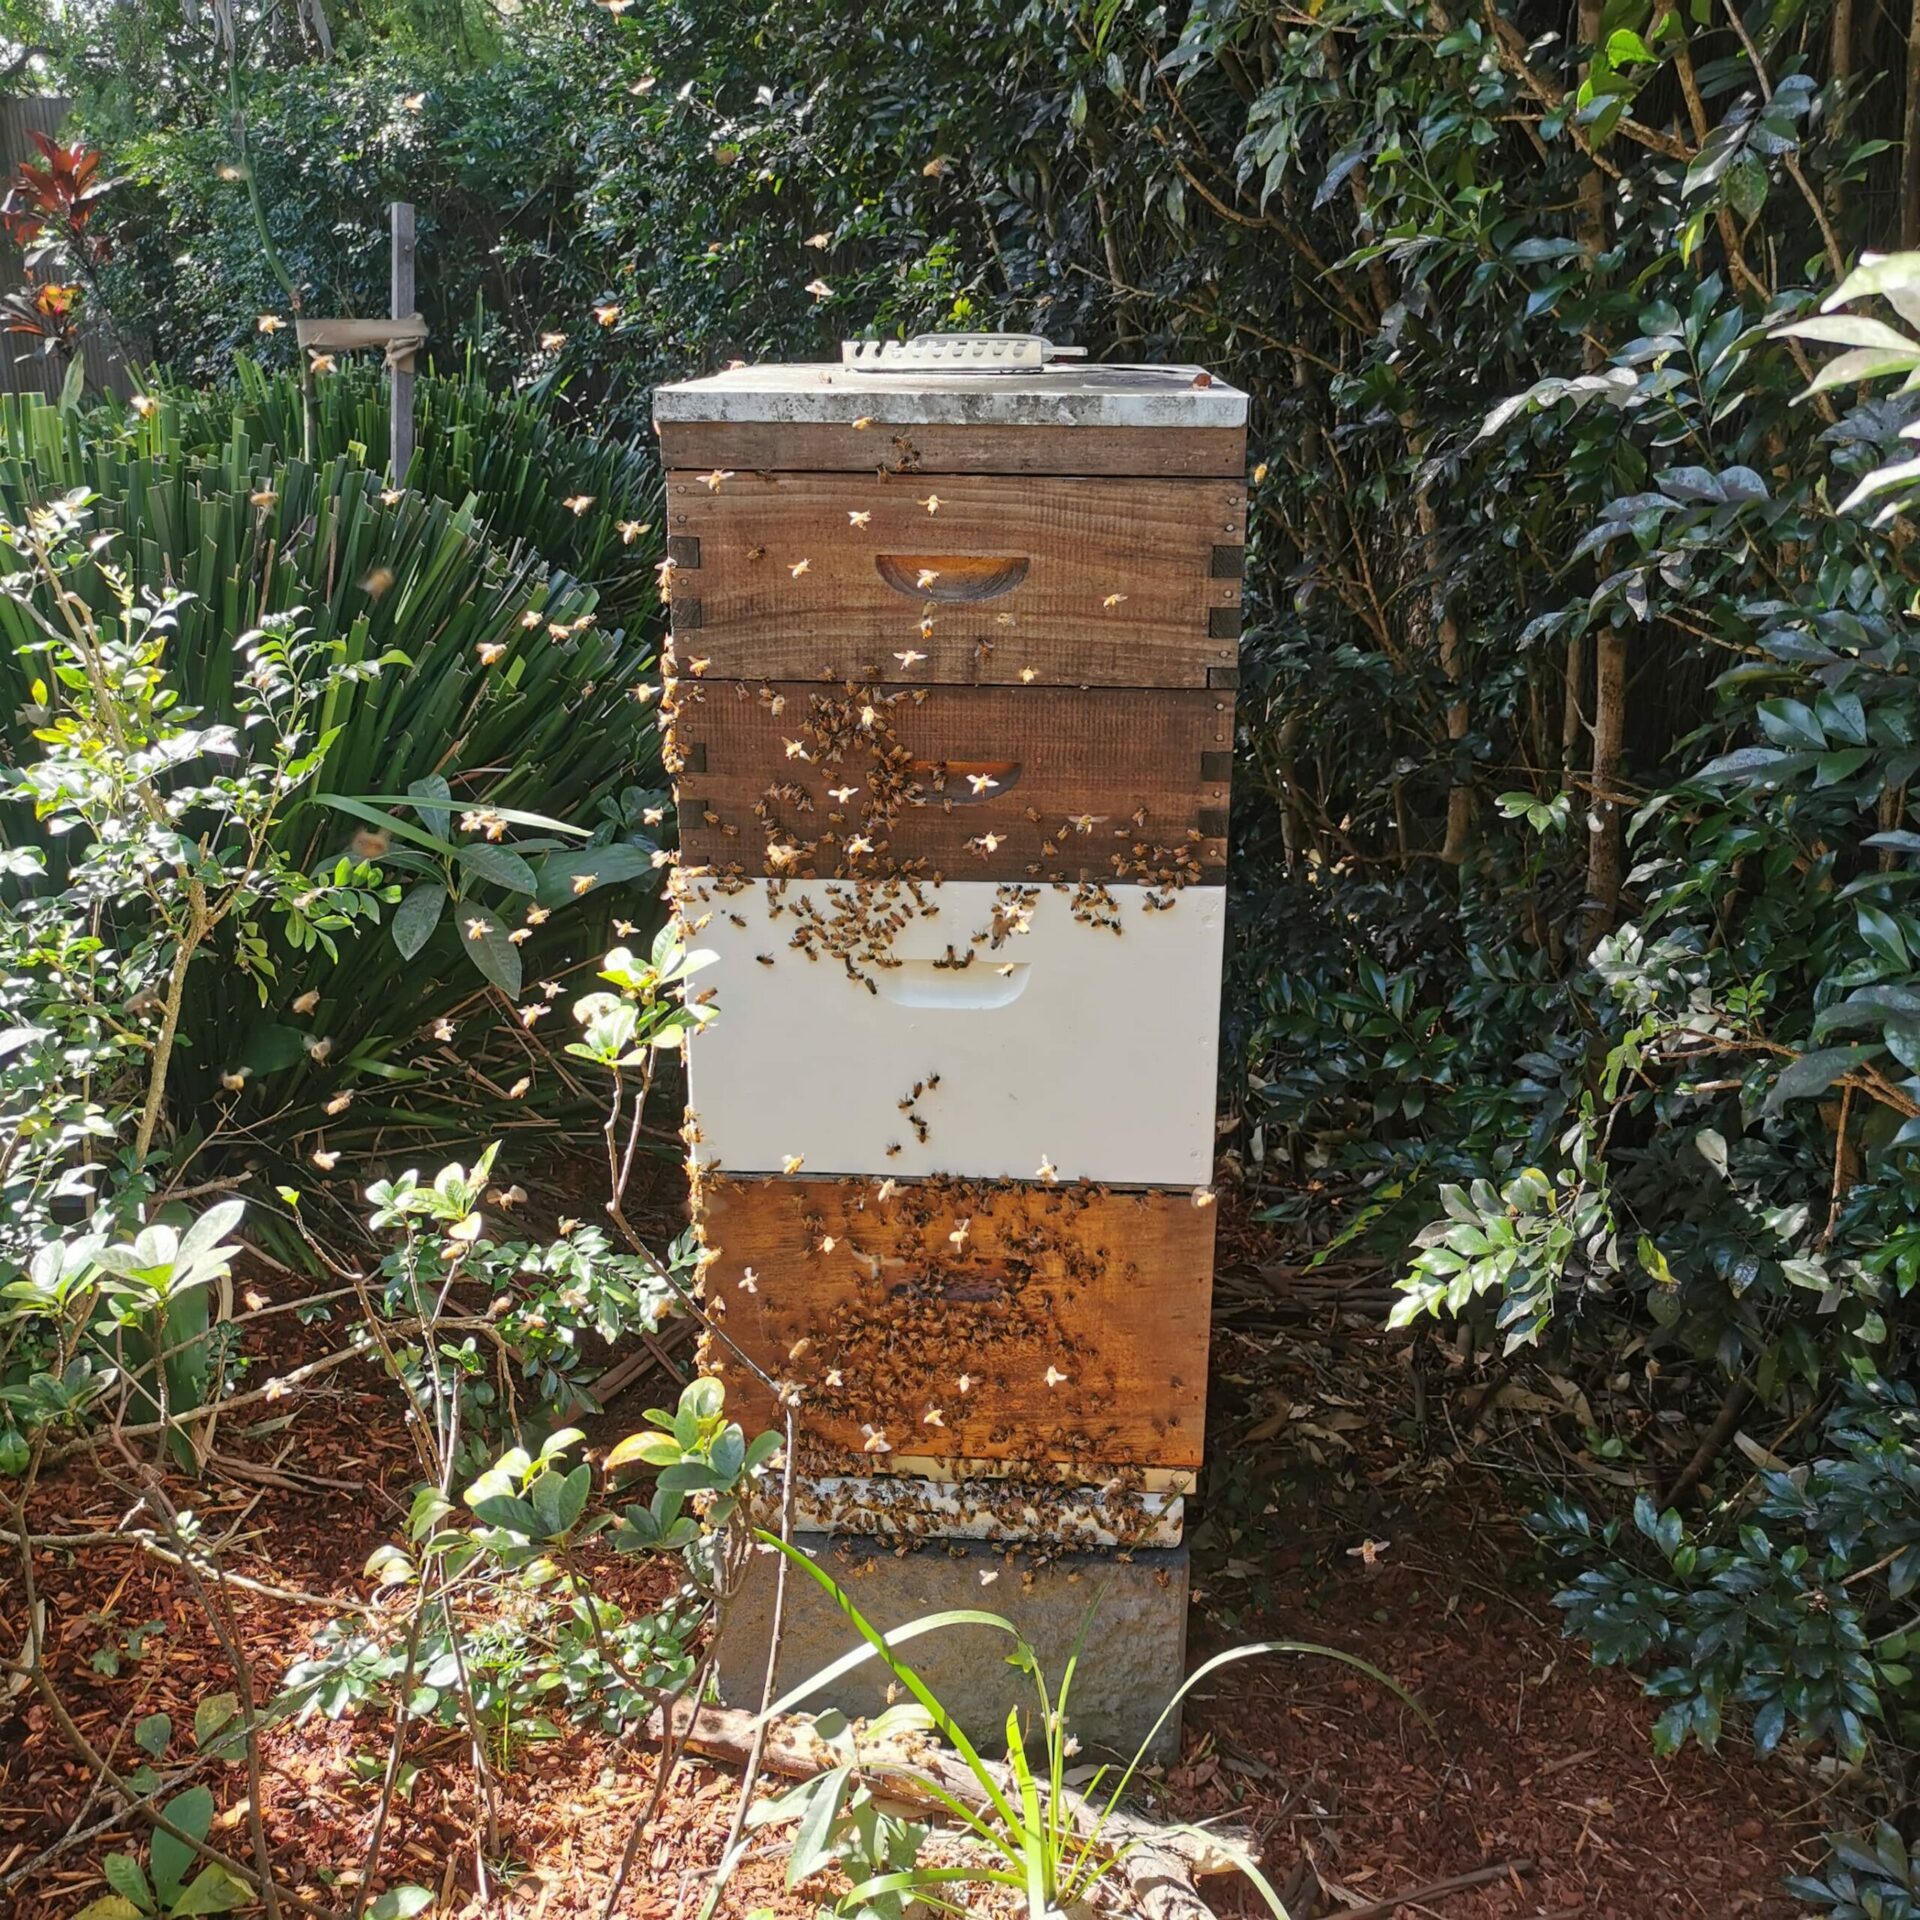 Urban Beehive situated in a leafy Sydney garden